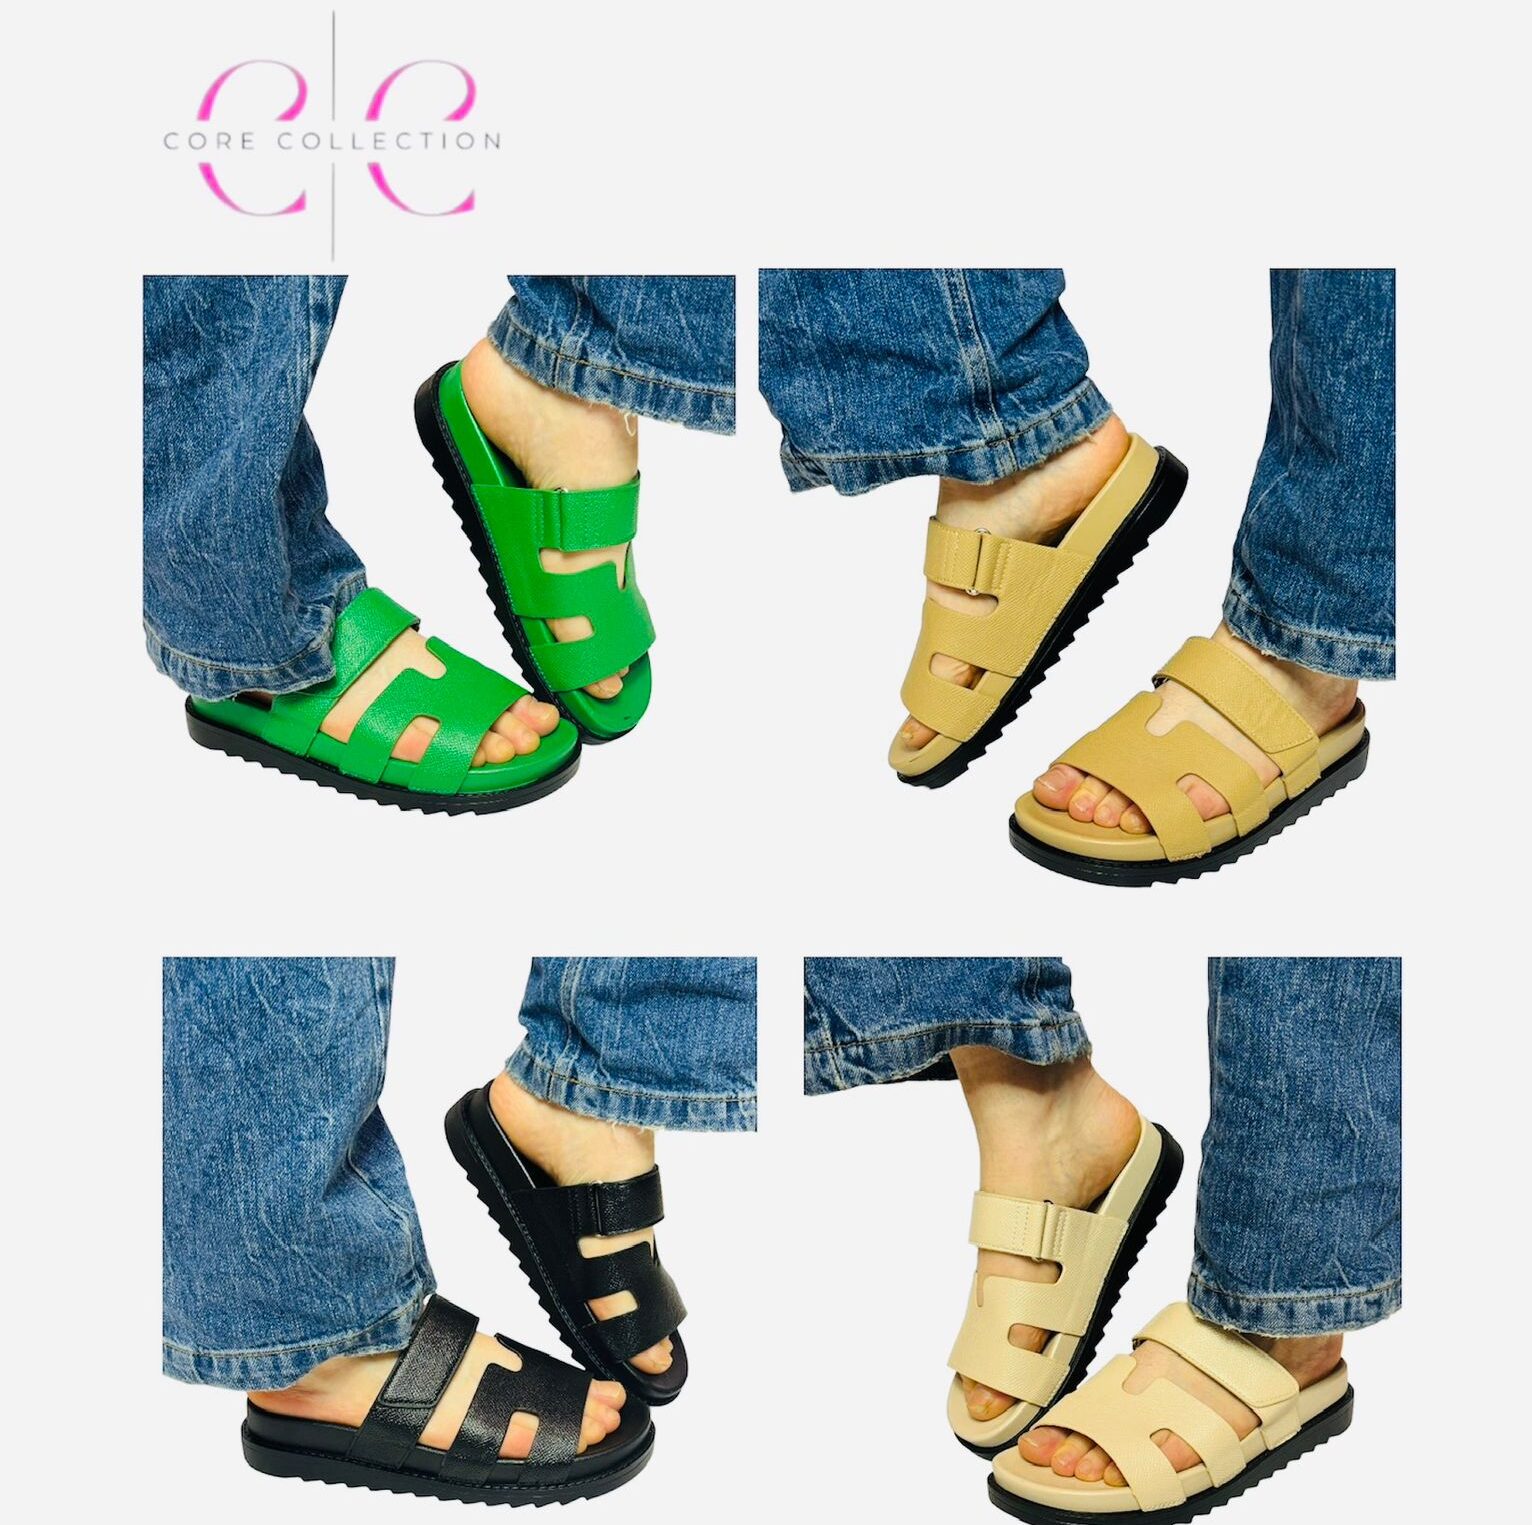 Experience Comfort with Ultra-Soft Moshulu Slippers Core Collection's 4